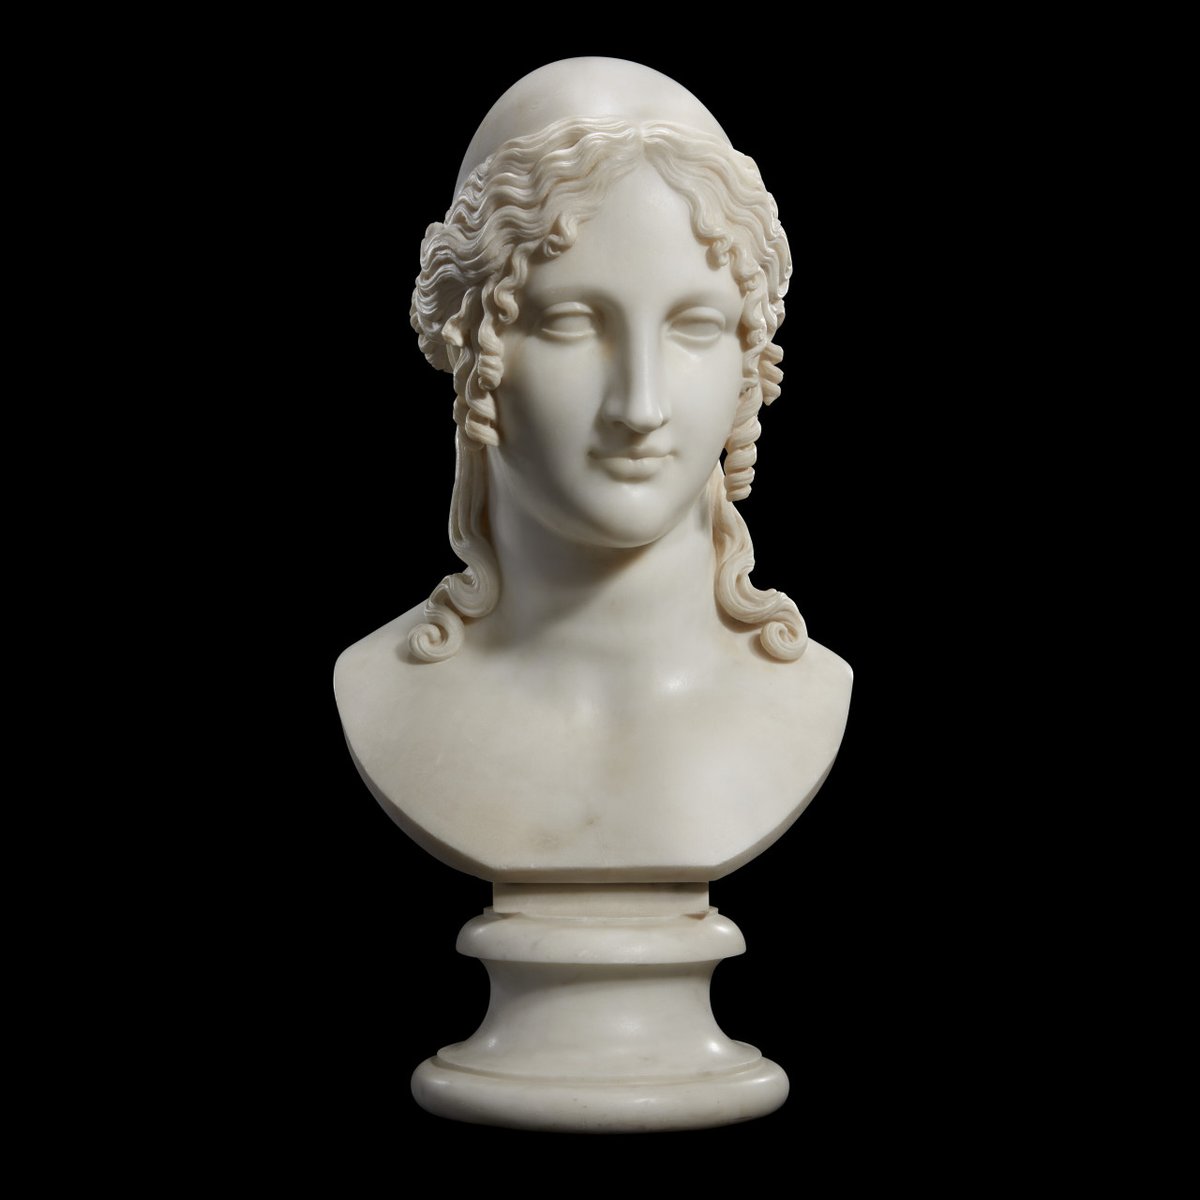 #AuctionUpdate #AntonioCanova's masterwork 'Bust of Helen' sold for £3,549,000. This spectacular marble bust depicts Helen of Troy, daughter of the god Zeus and known as the legendary beauty that famously 'launched a thousand ships': bit.ly/43ciq4f